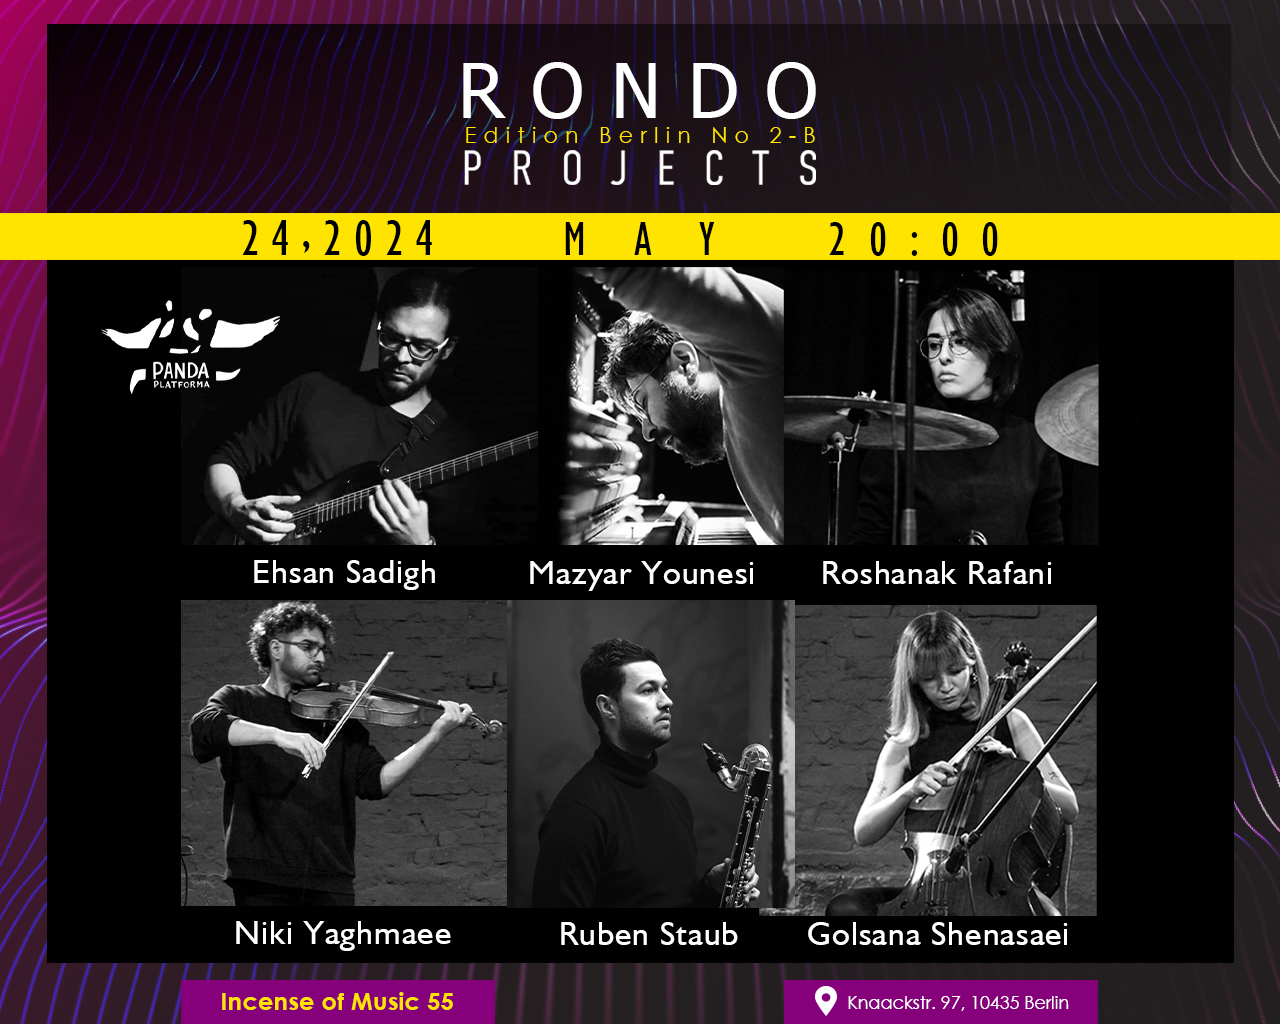 Incense of Music 55: Rondo Projects Edition Berlin No. 2 - 
		24/05, 20:00